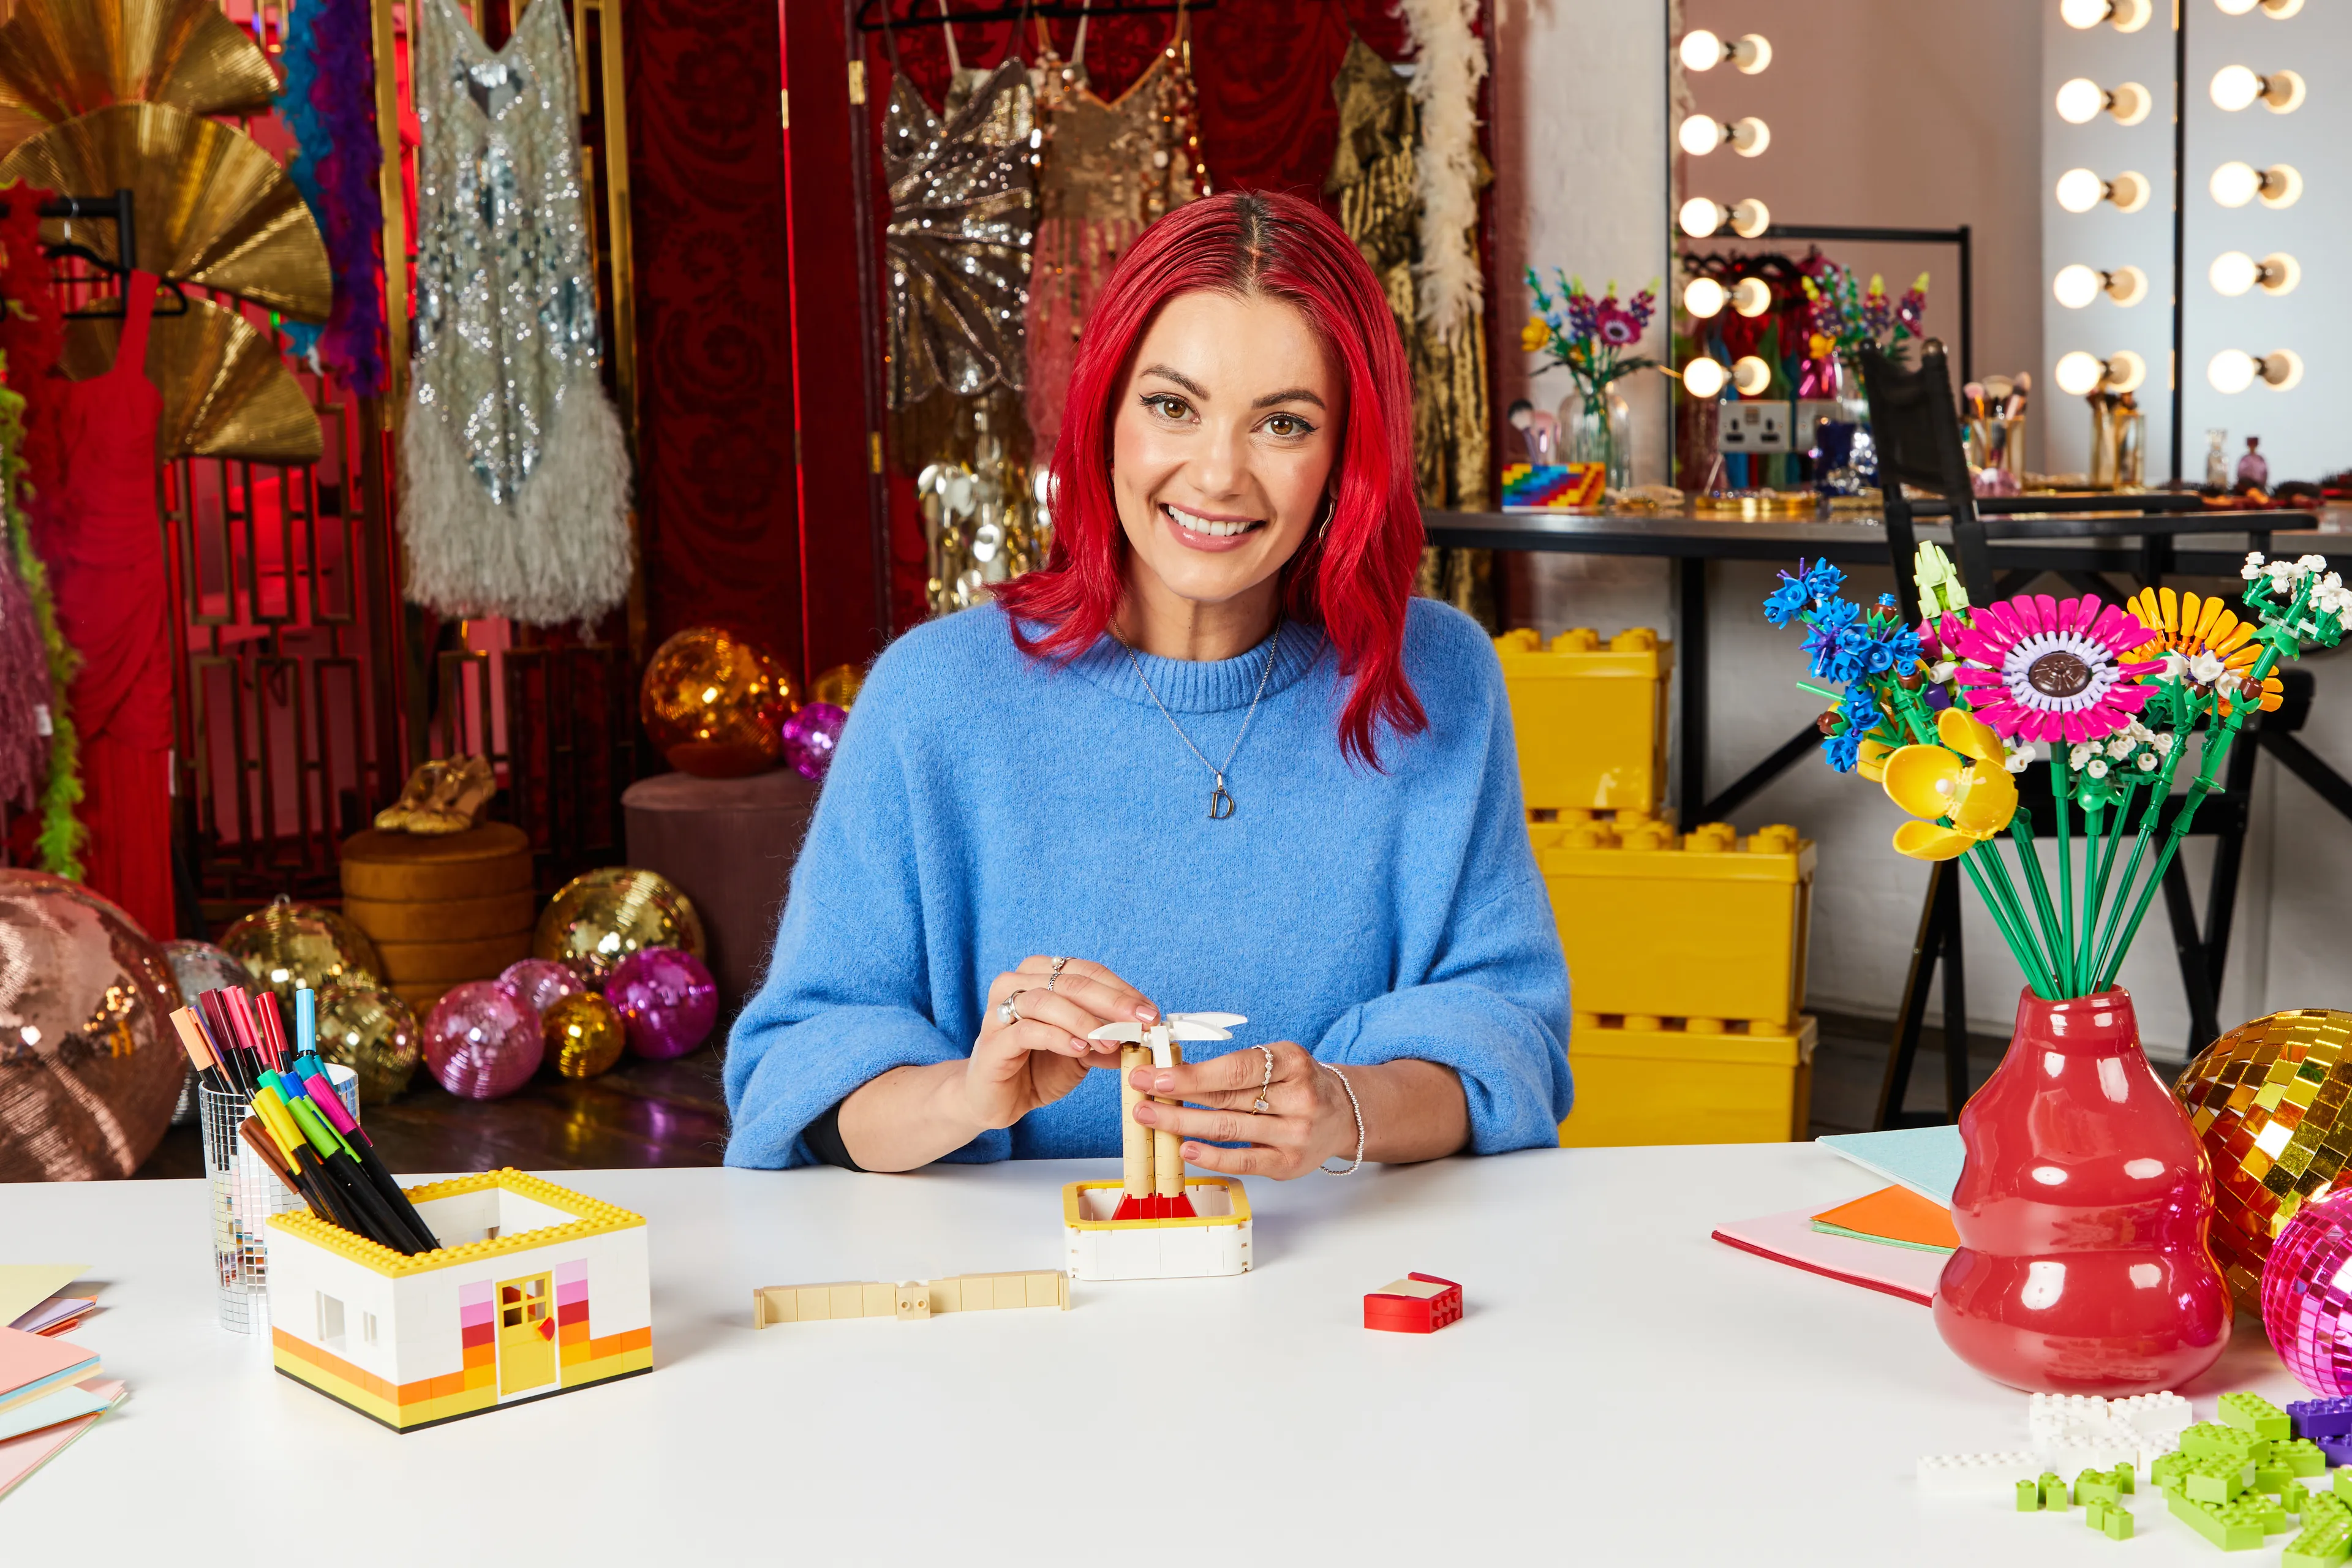 Dianne Buswell building with LEGO bricks